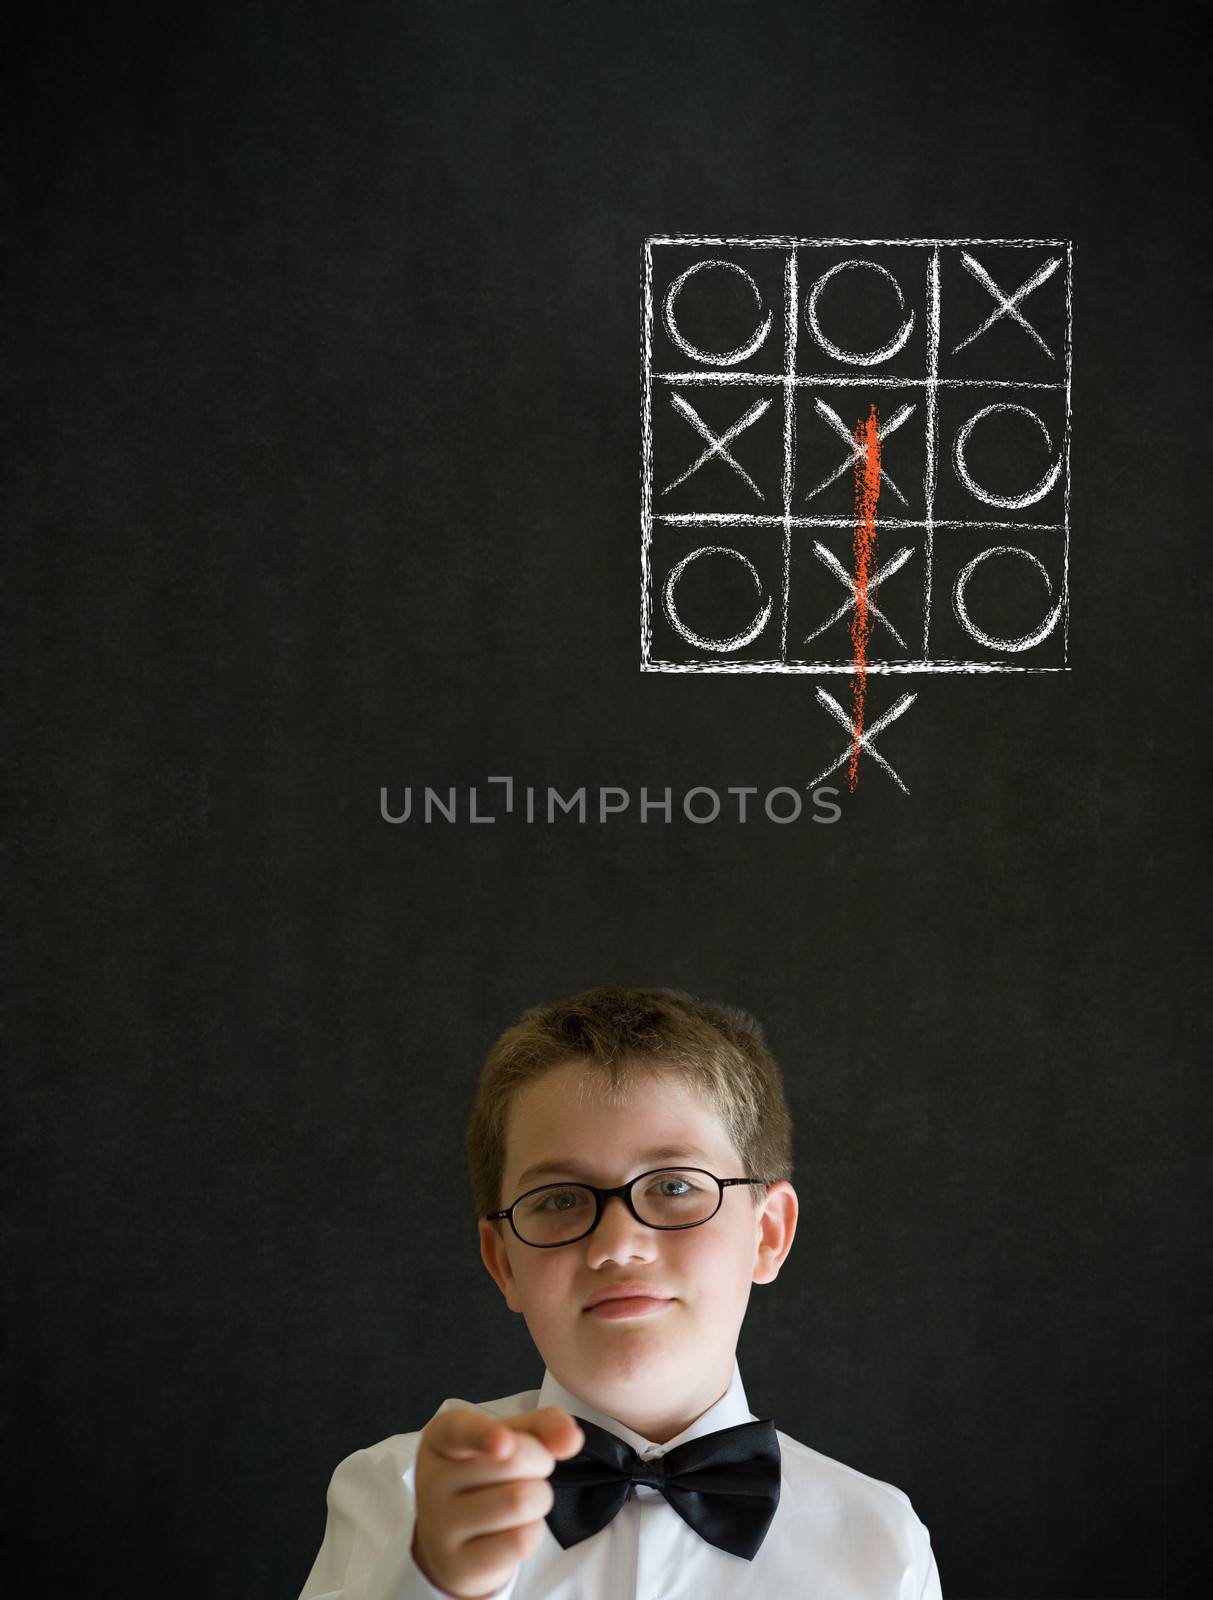 Education needs you thinking boy dressed up as business man with thinking out of the box tic tac toe concept on blackboard background